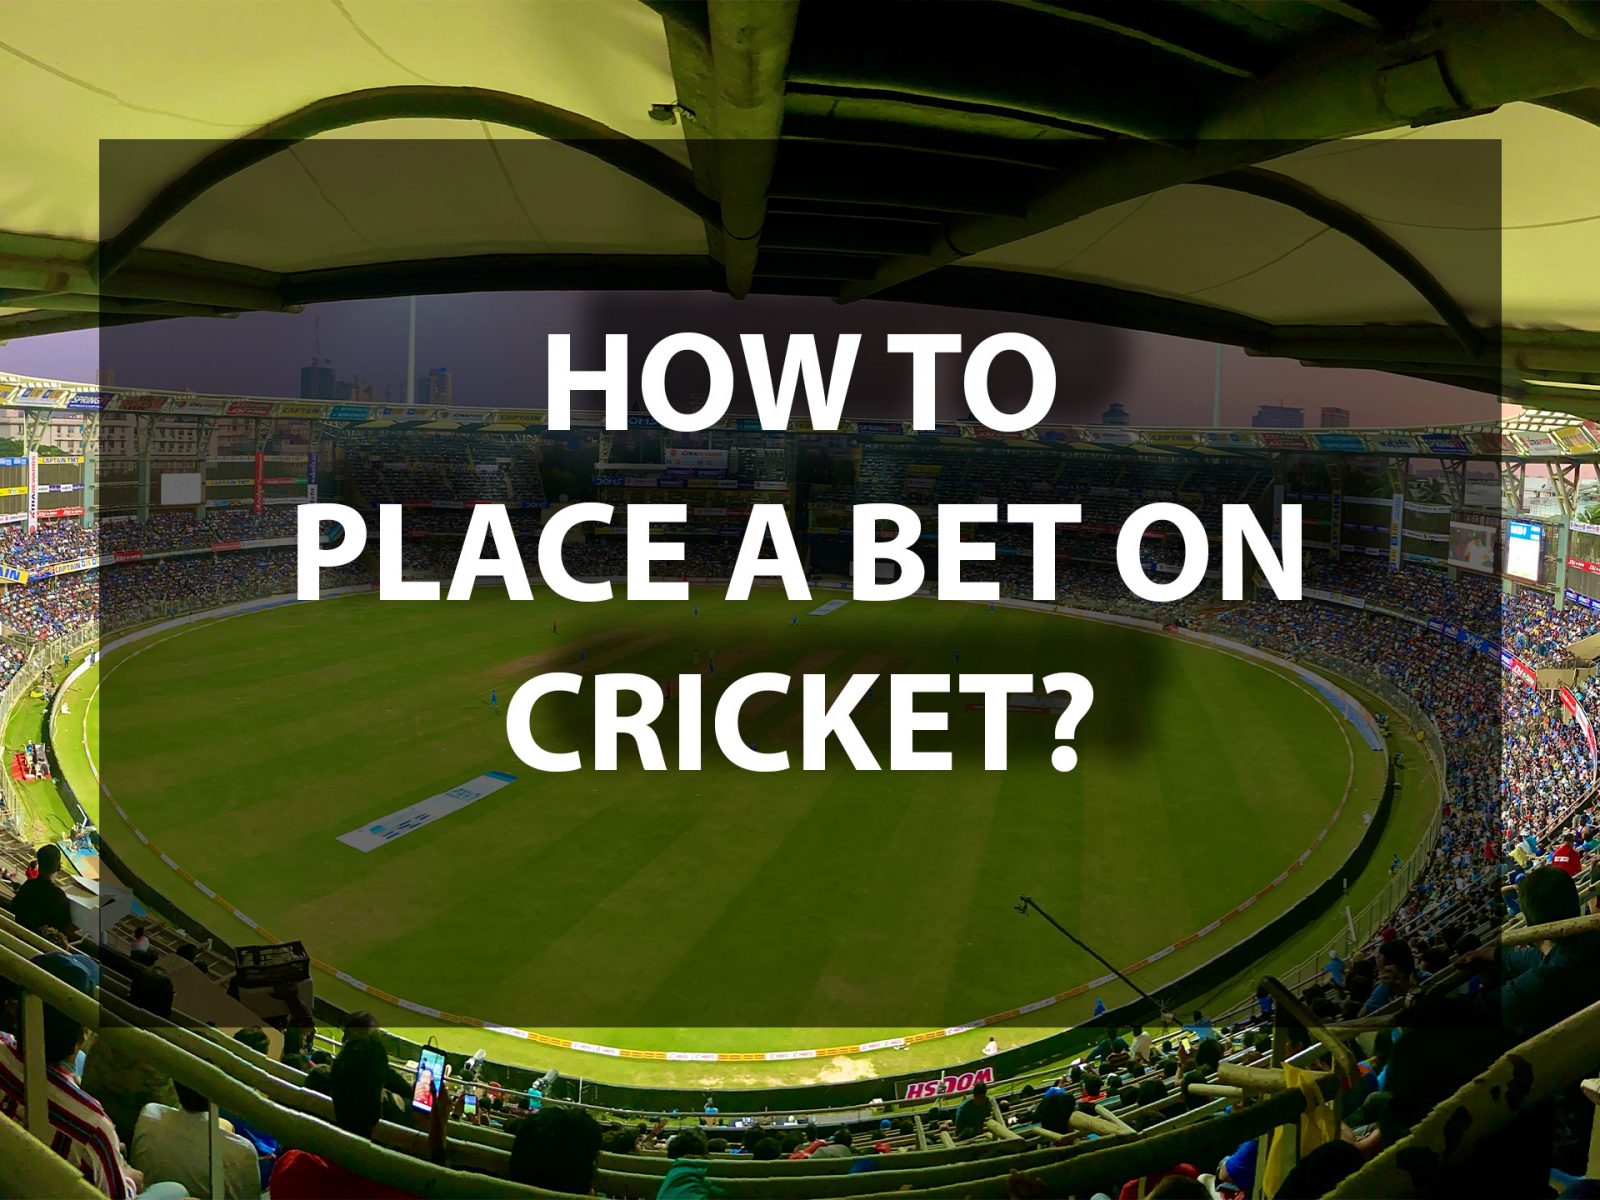 Read more details about how to place a bet in cricket in India